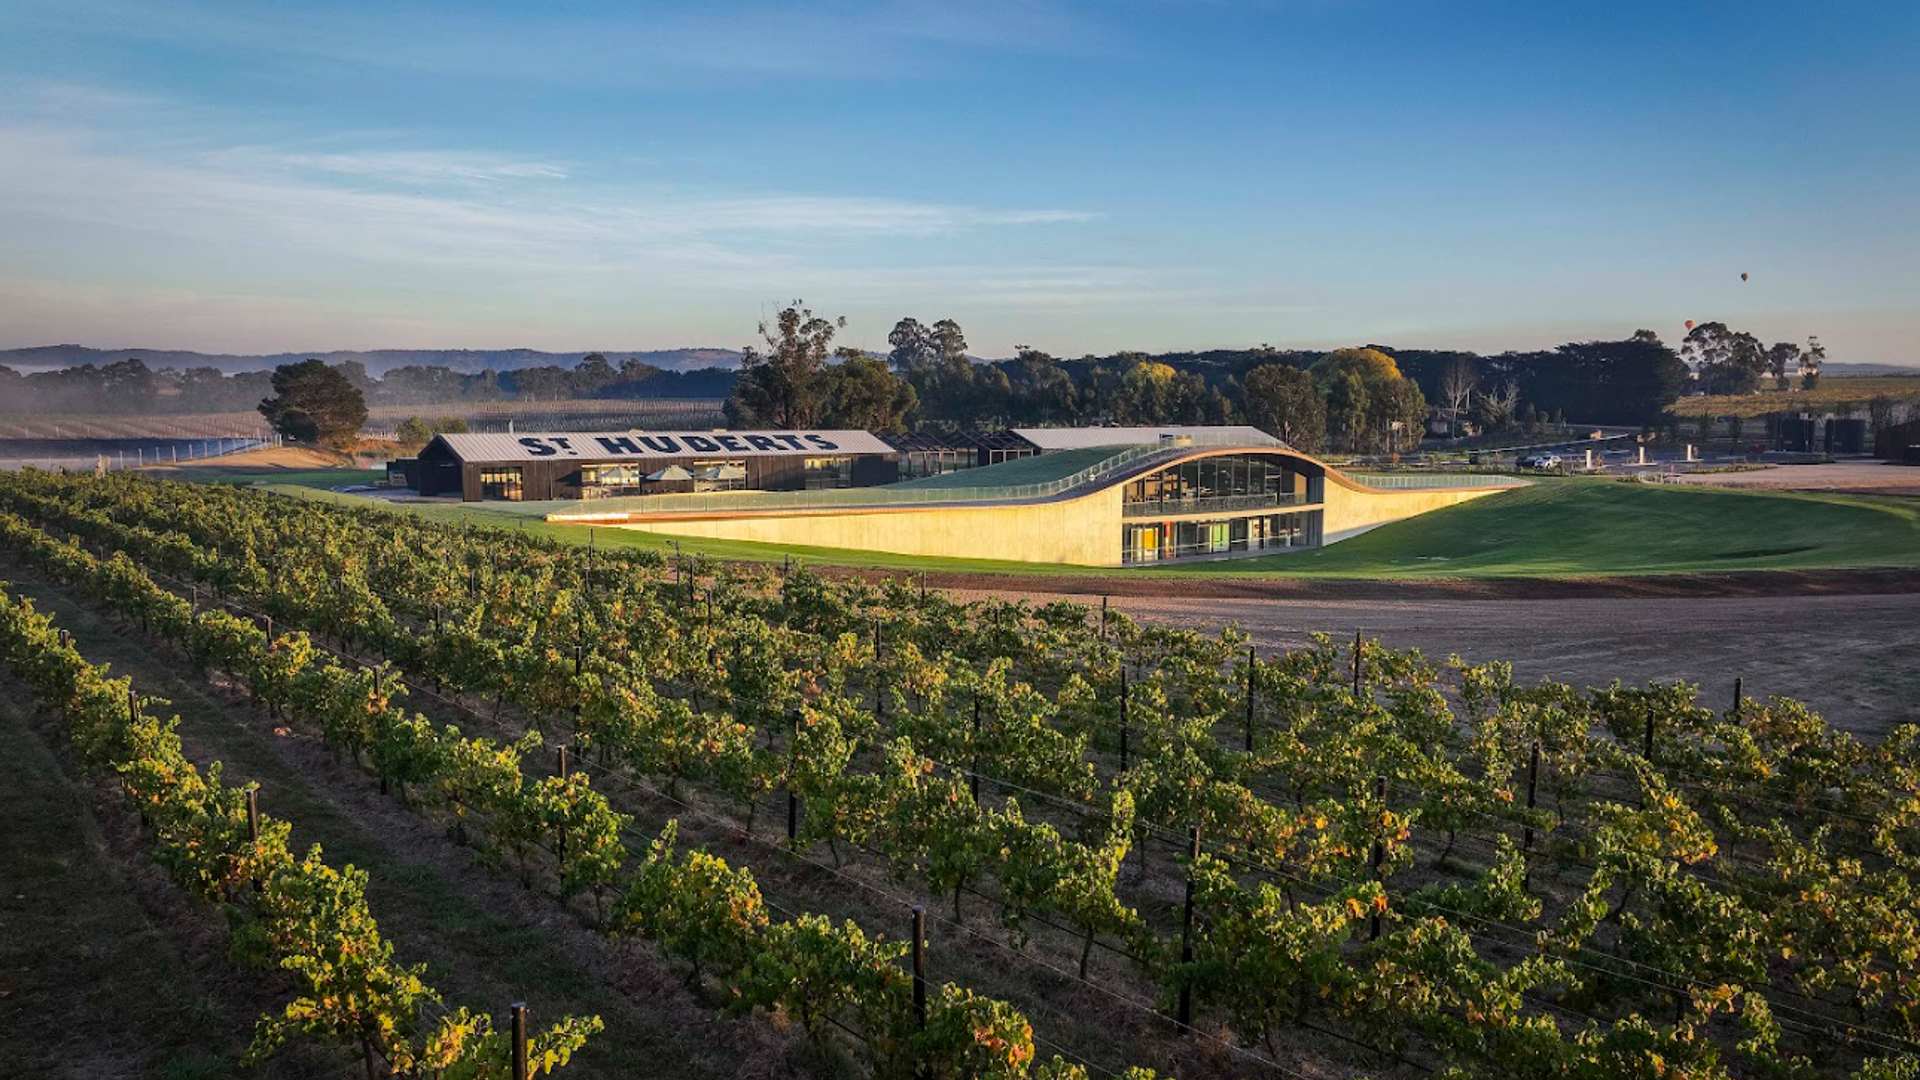 Hubert Estate Is the Yarra Valley's Ambitious New Destination Winery